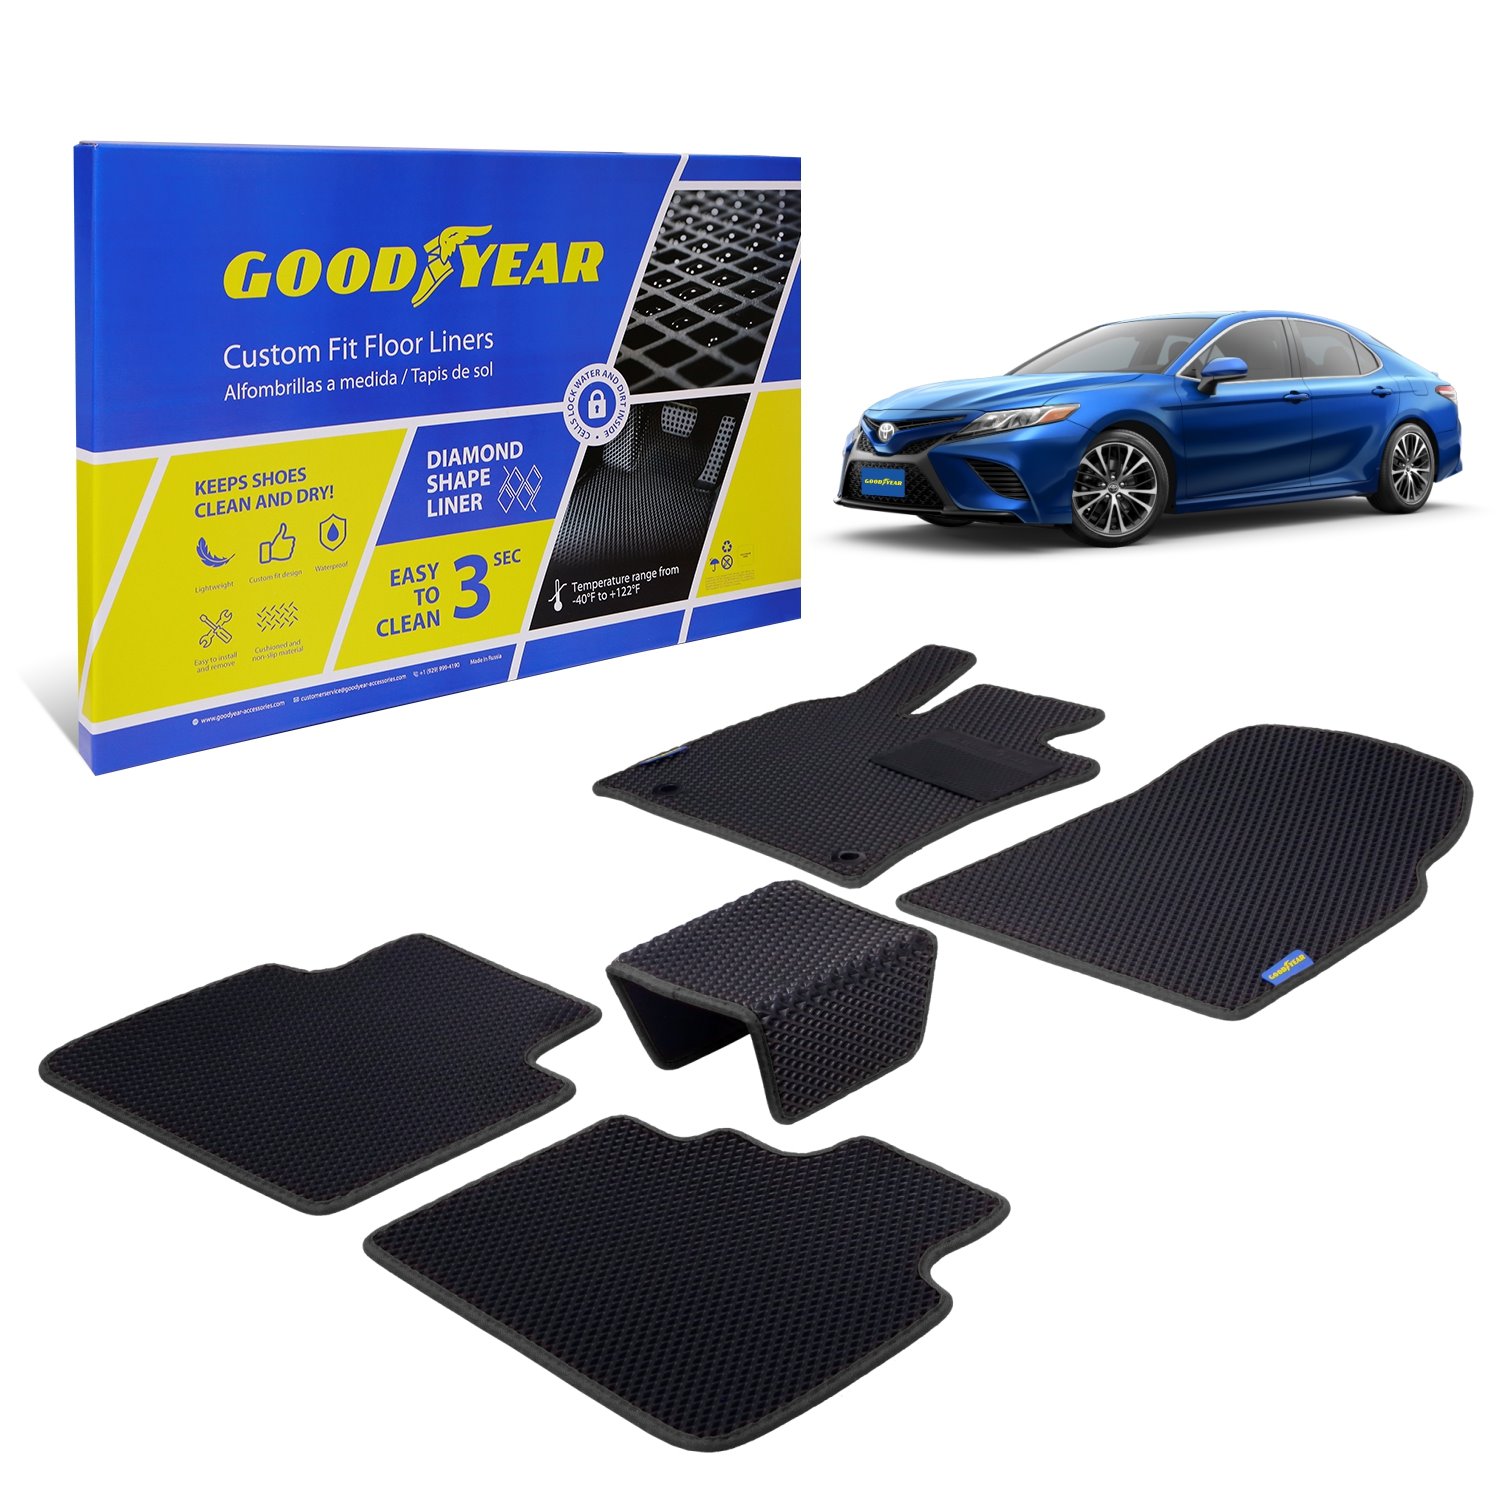 Goodyear Custom-Fit Floor Liners Fits Select Toyota Camry